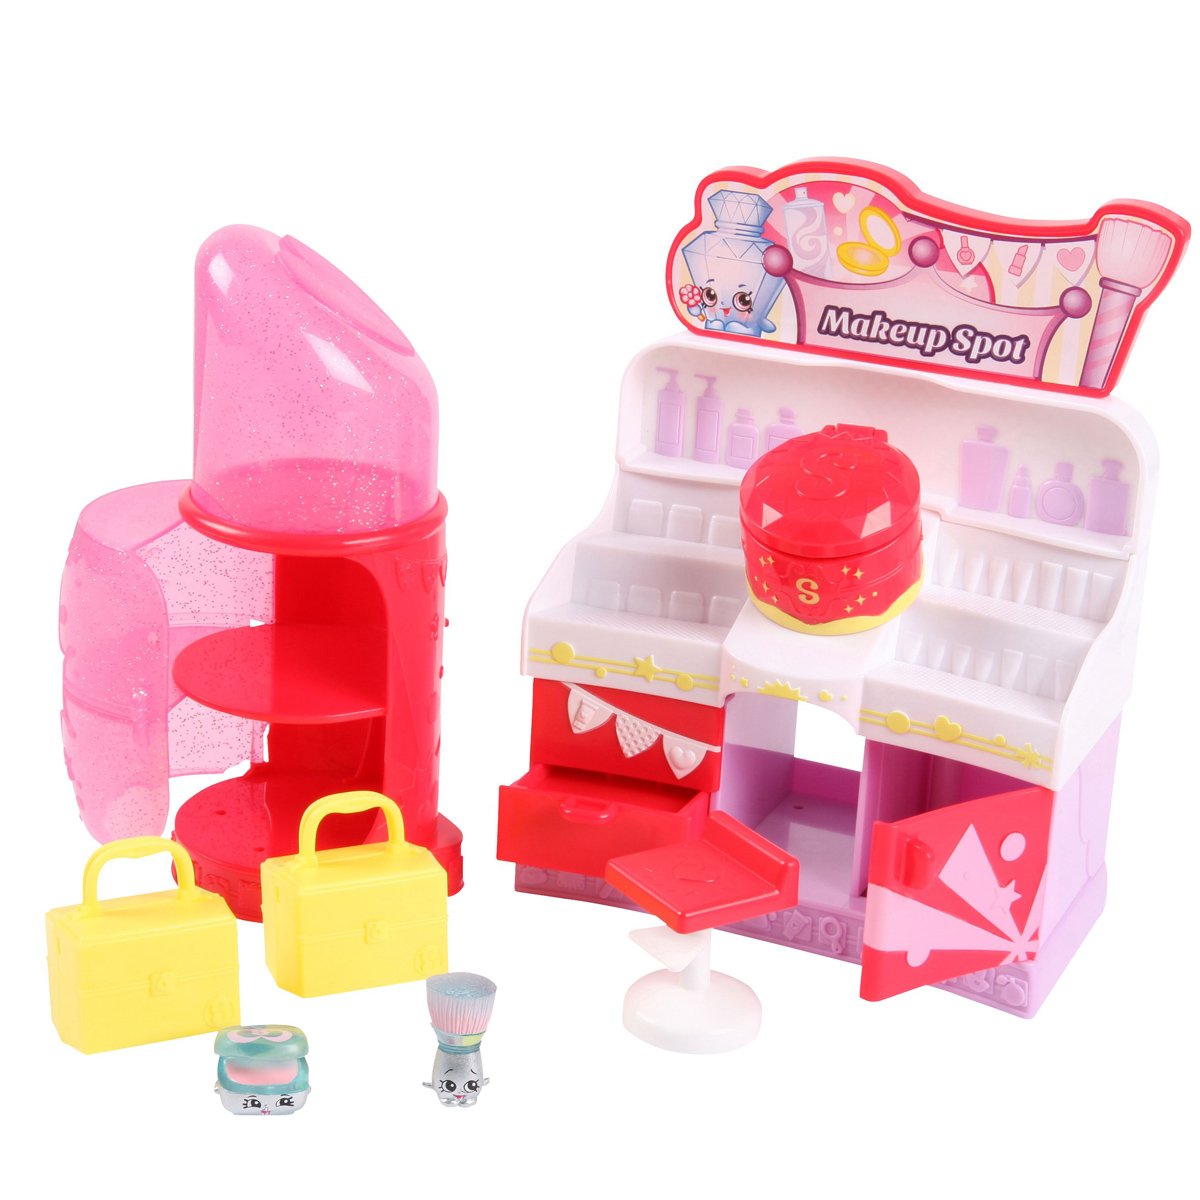 Shopkinds S3 Midprice Playset